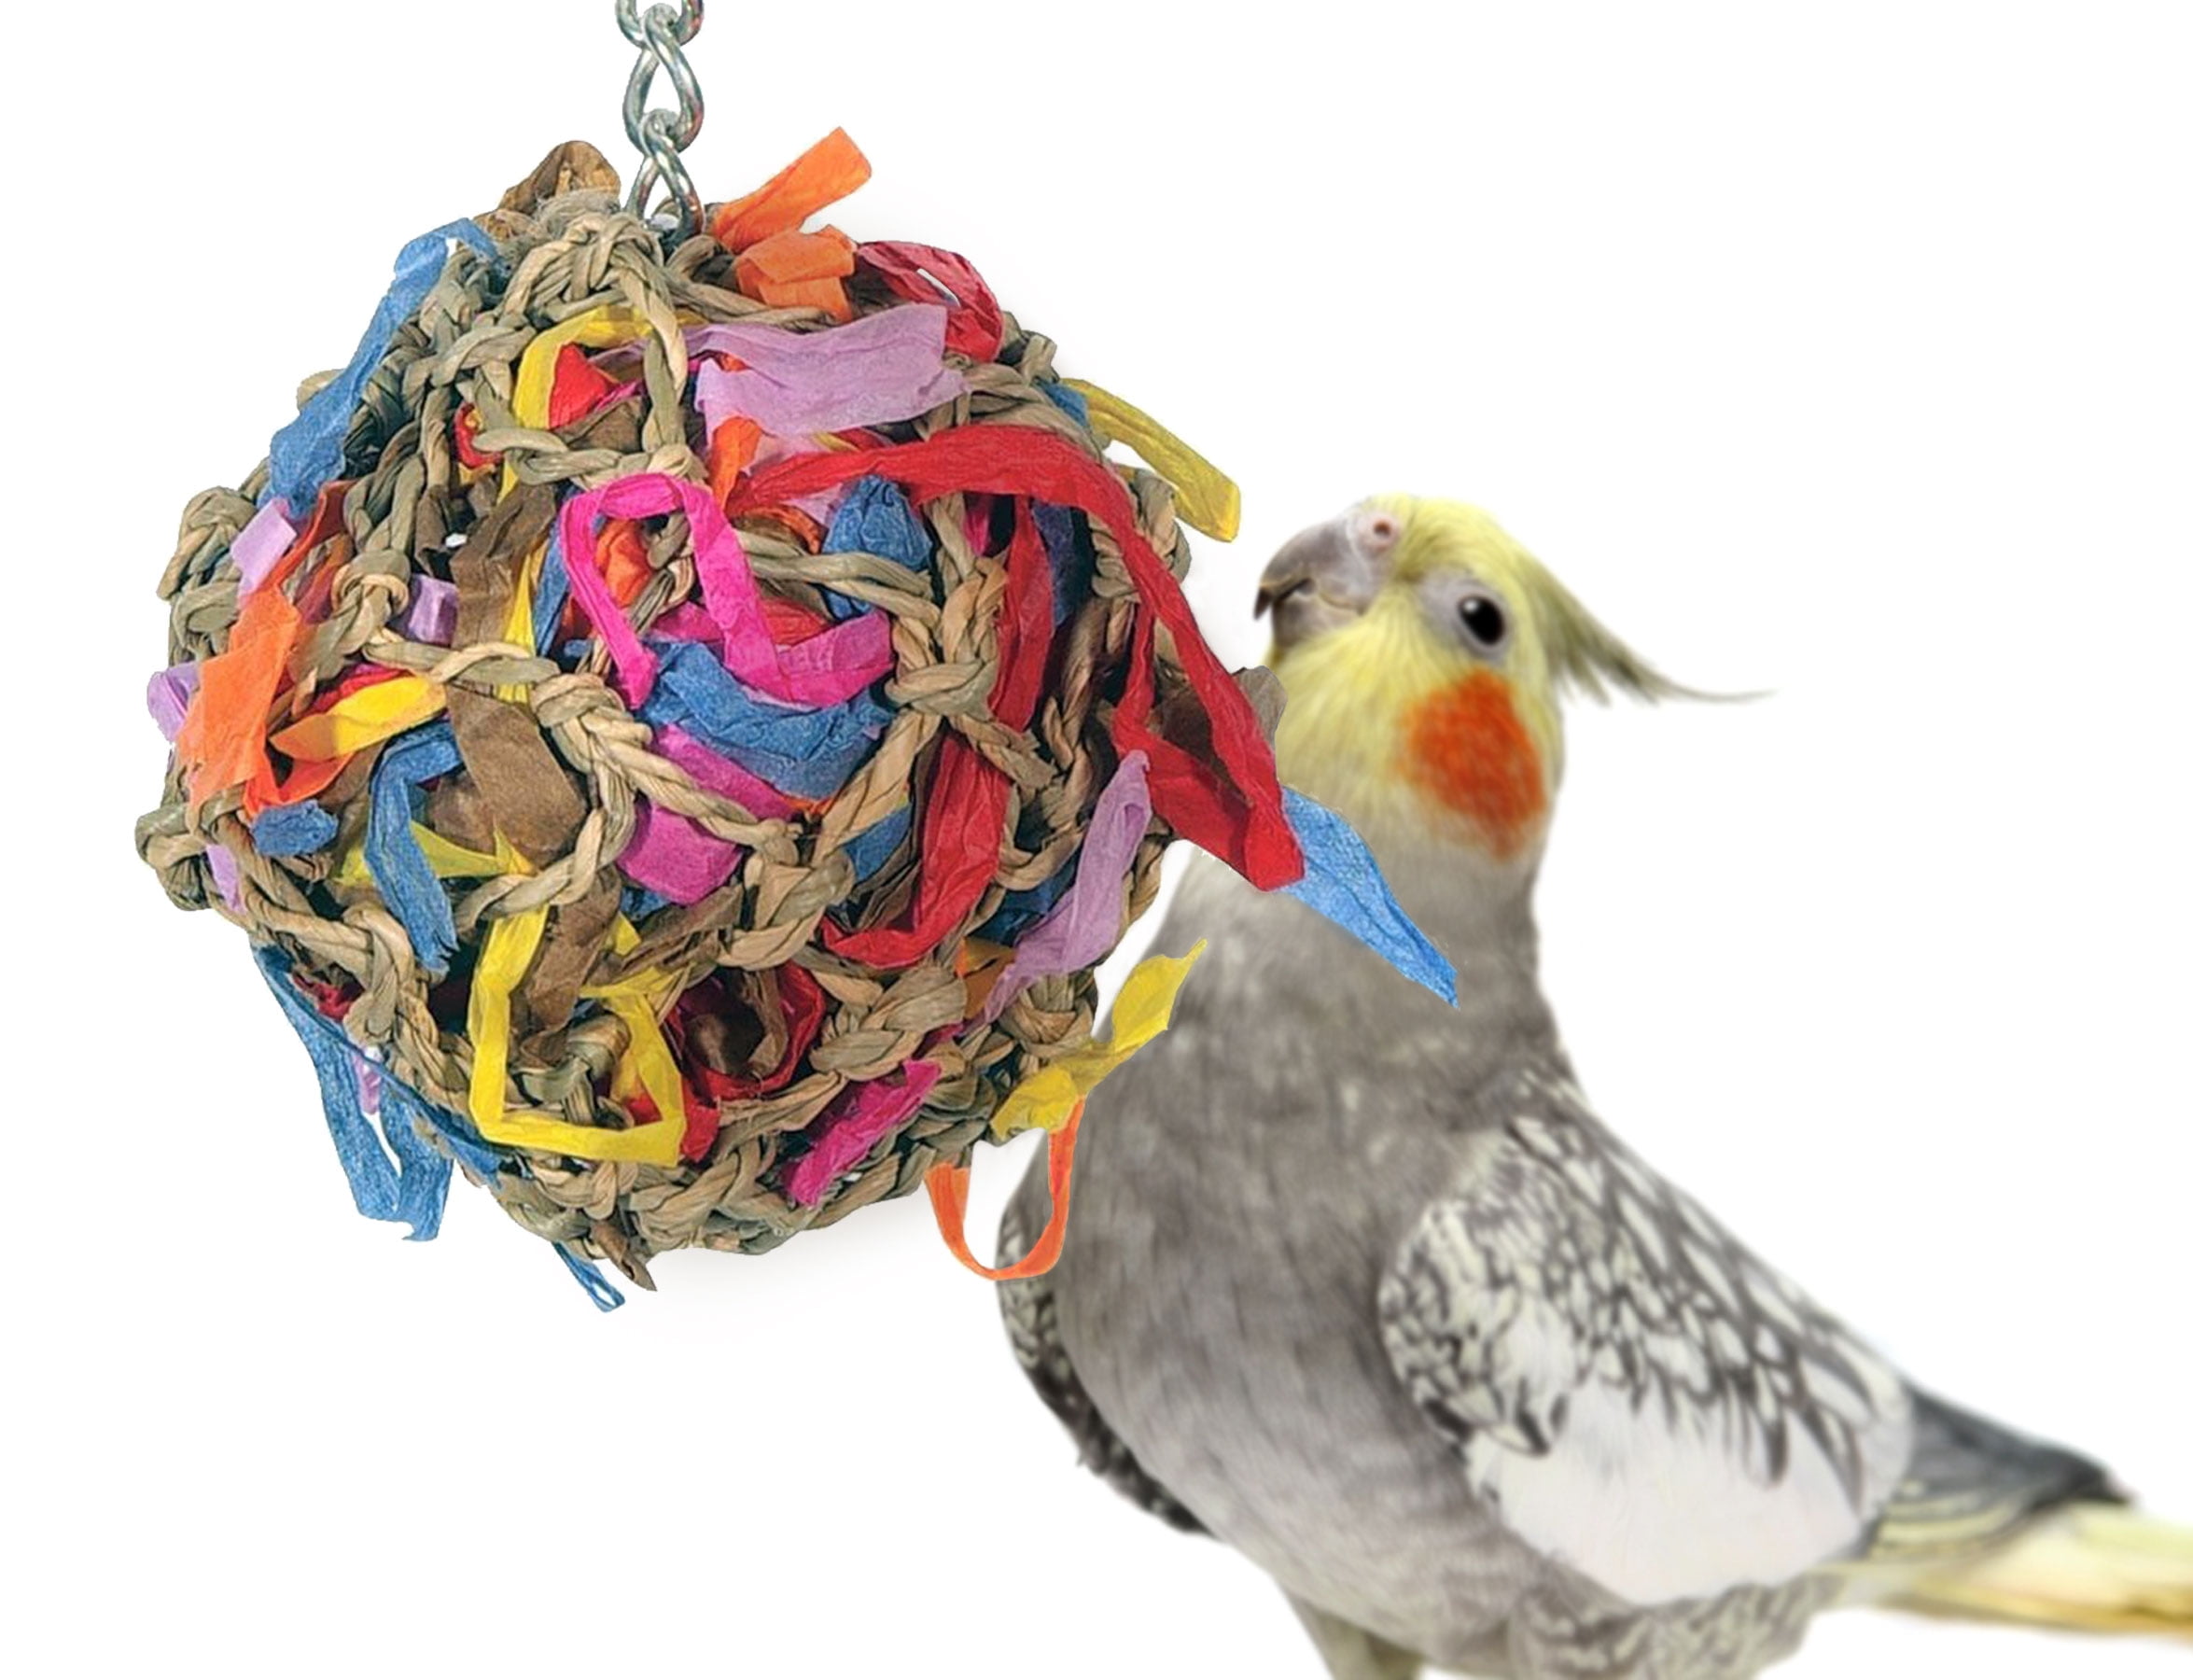 Knot and Rope Parrot Bird Toy Shredding Chewing Helps With Plucking 